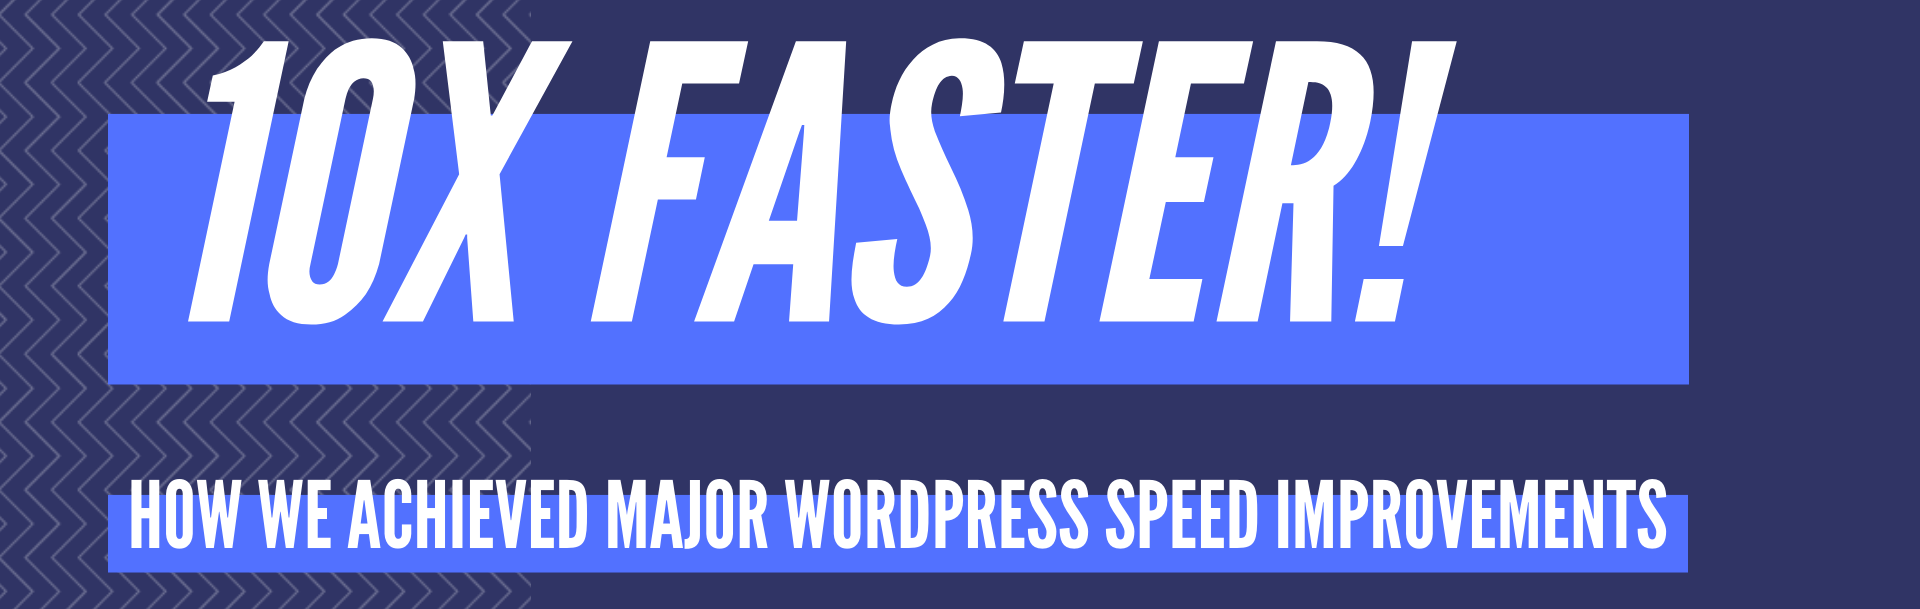 how we achieived 10 faster wordpress results